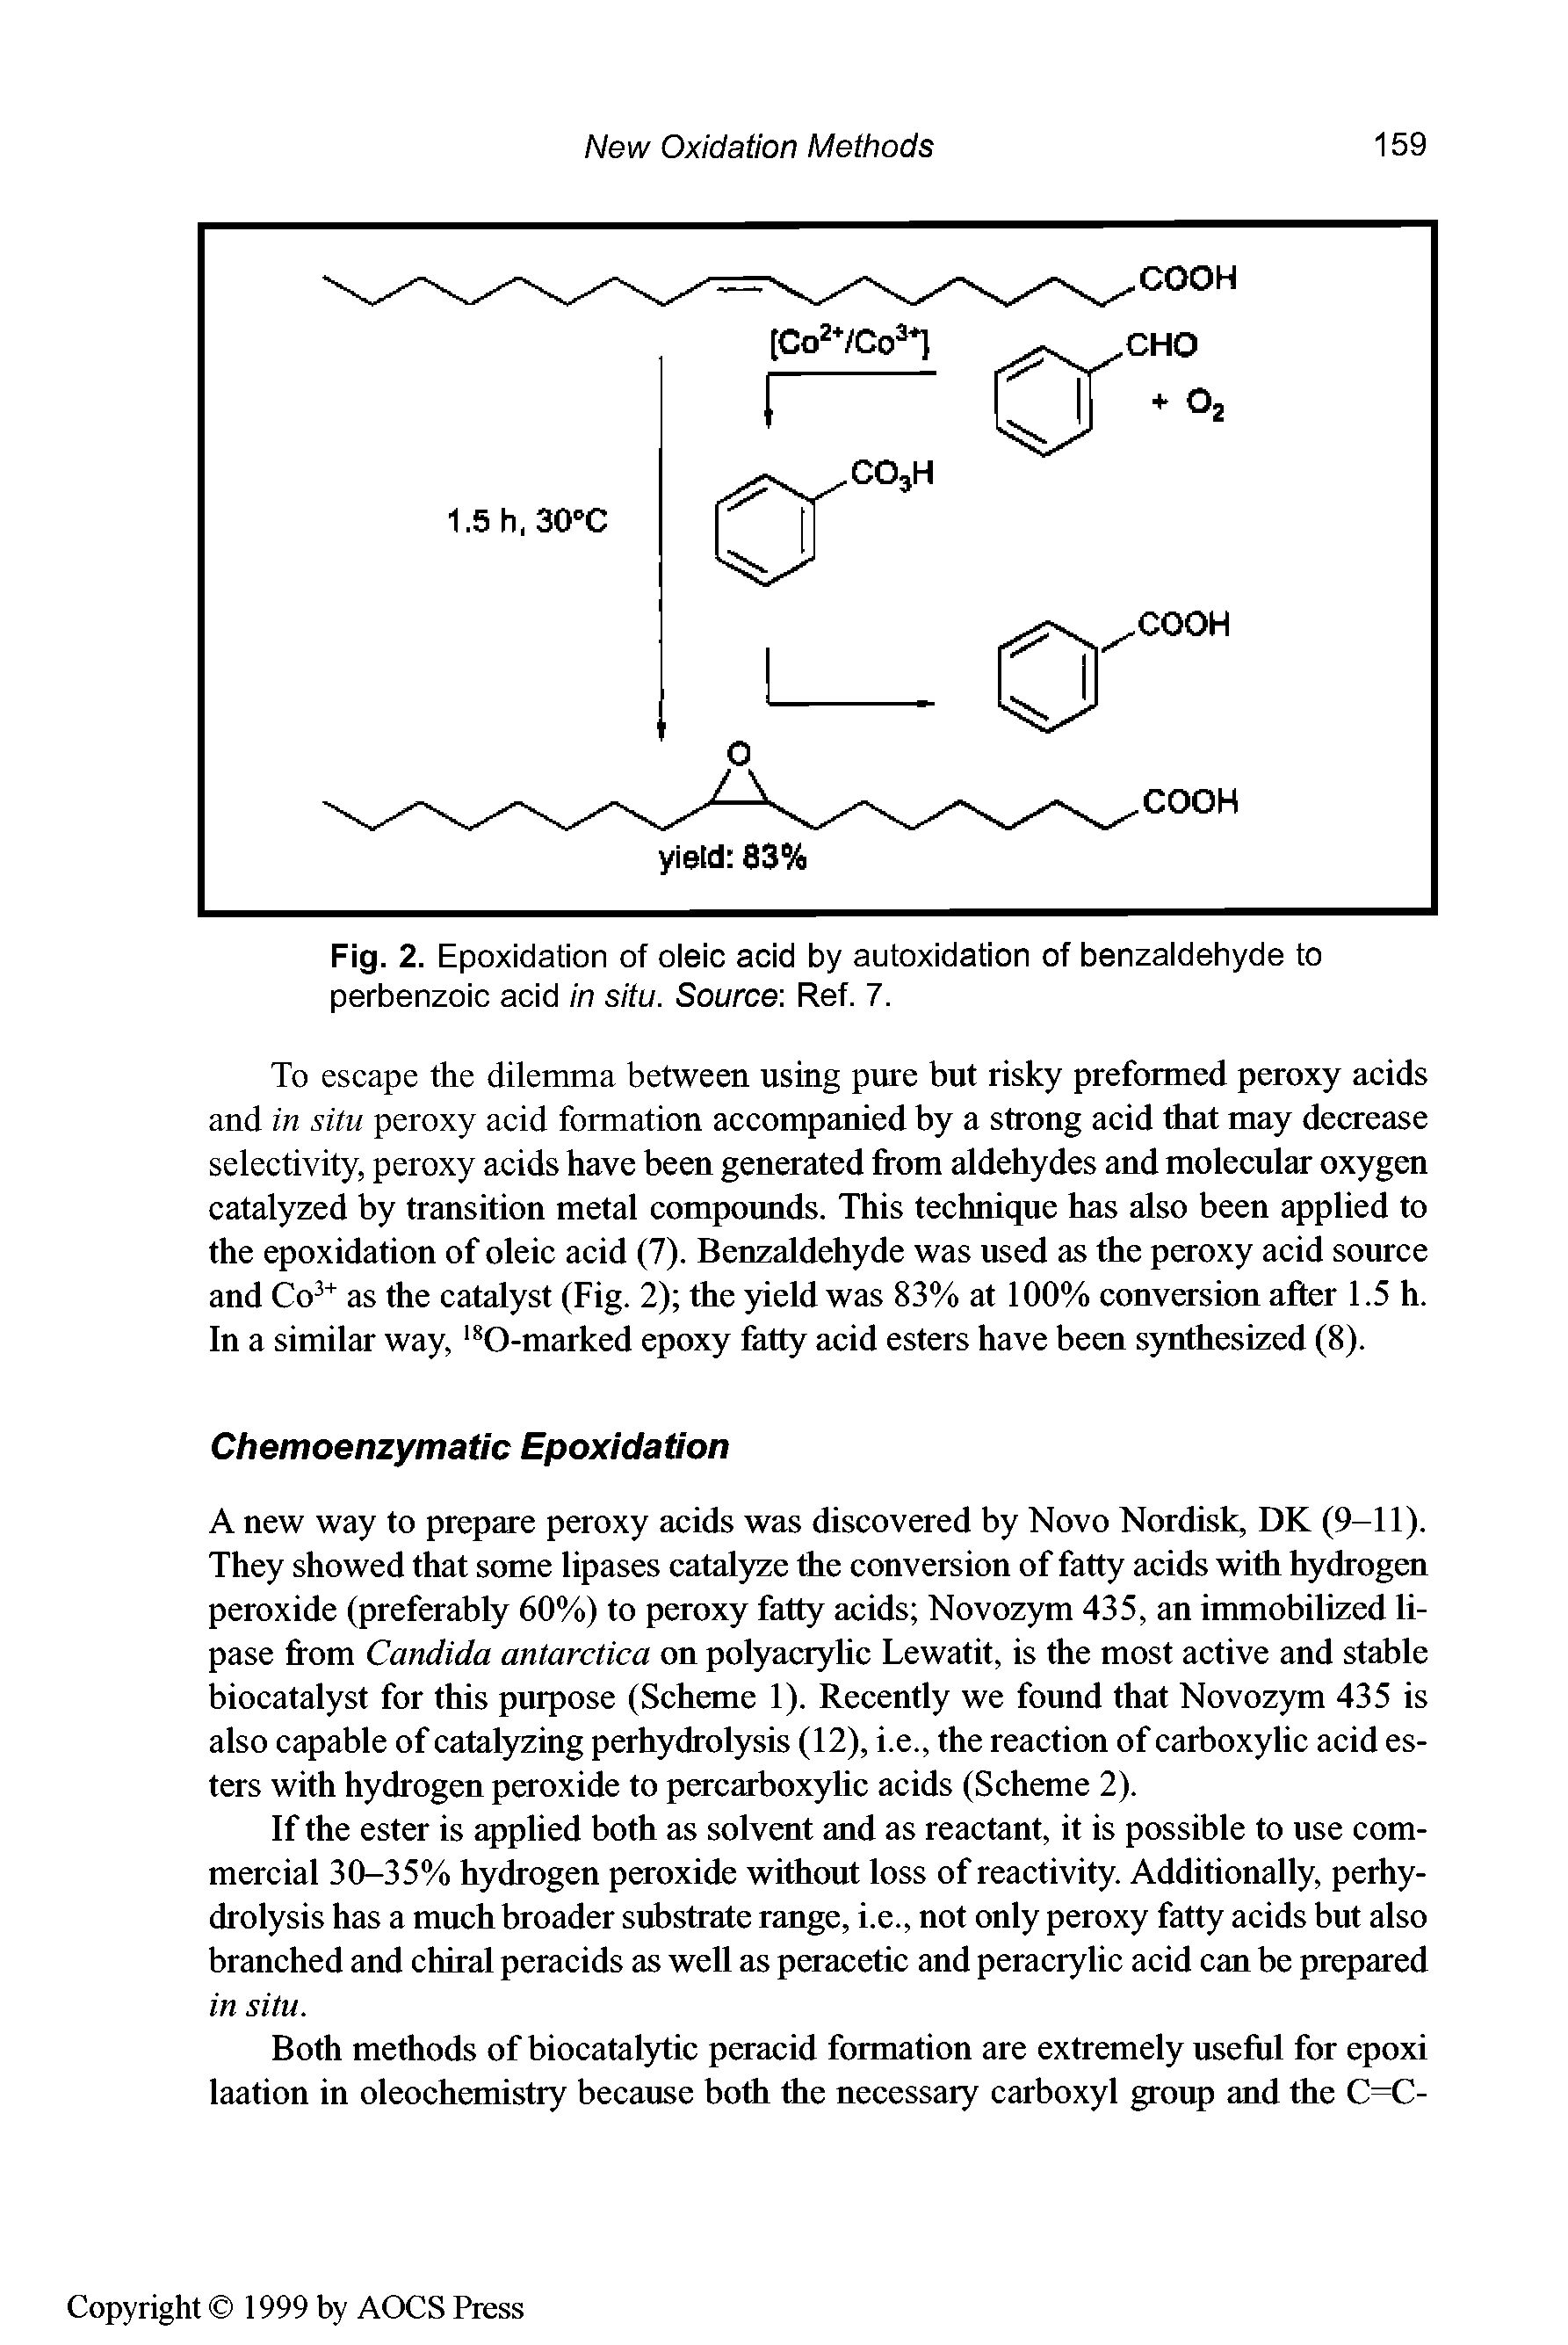 Fig. 2. Epoxidation of oleic acid by autoxidation of benzaldehyde to perbenzoic acid in situ. Source Ref. 7.